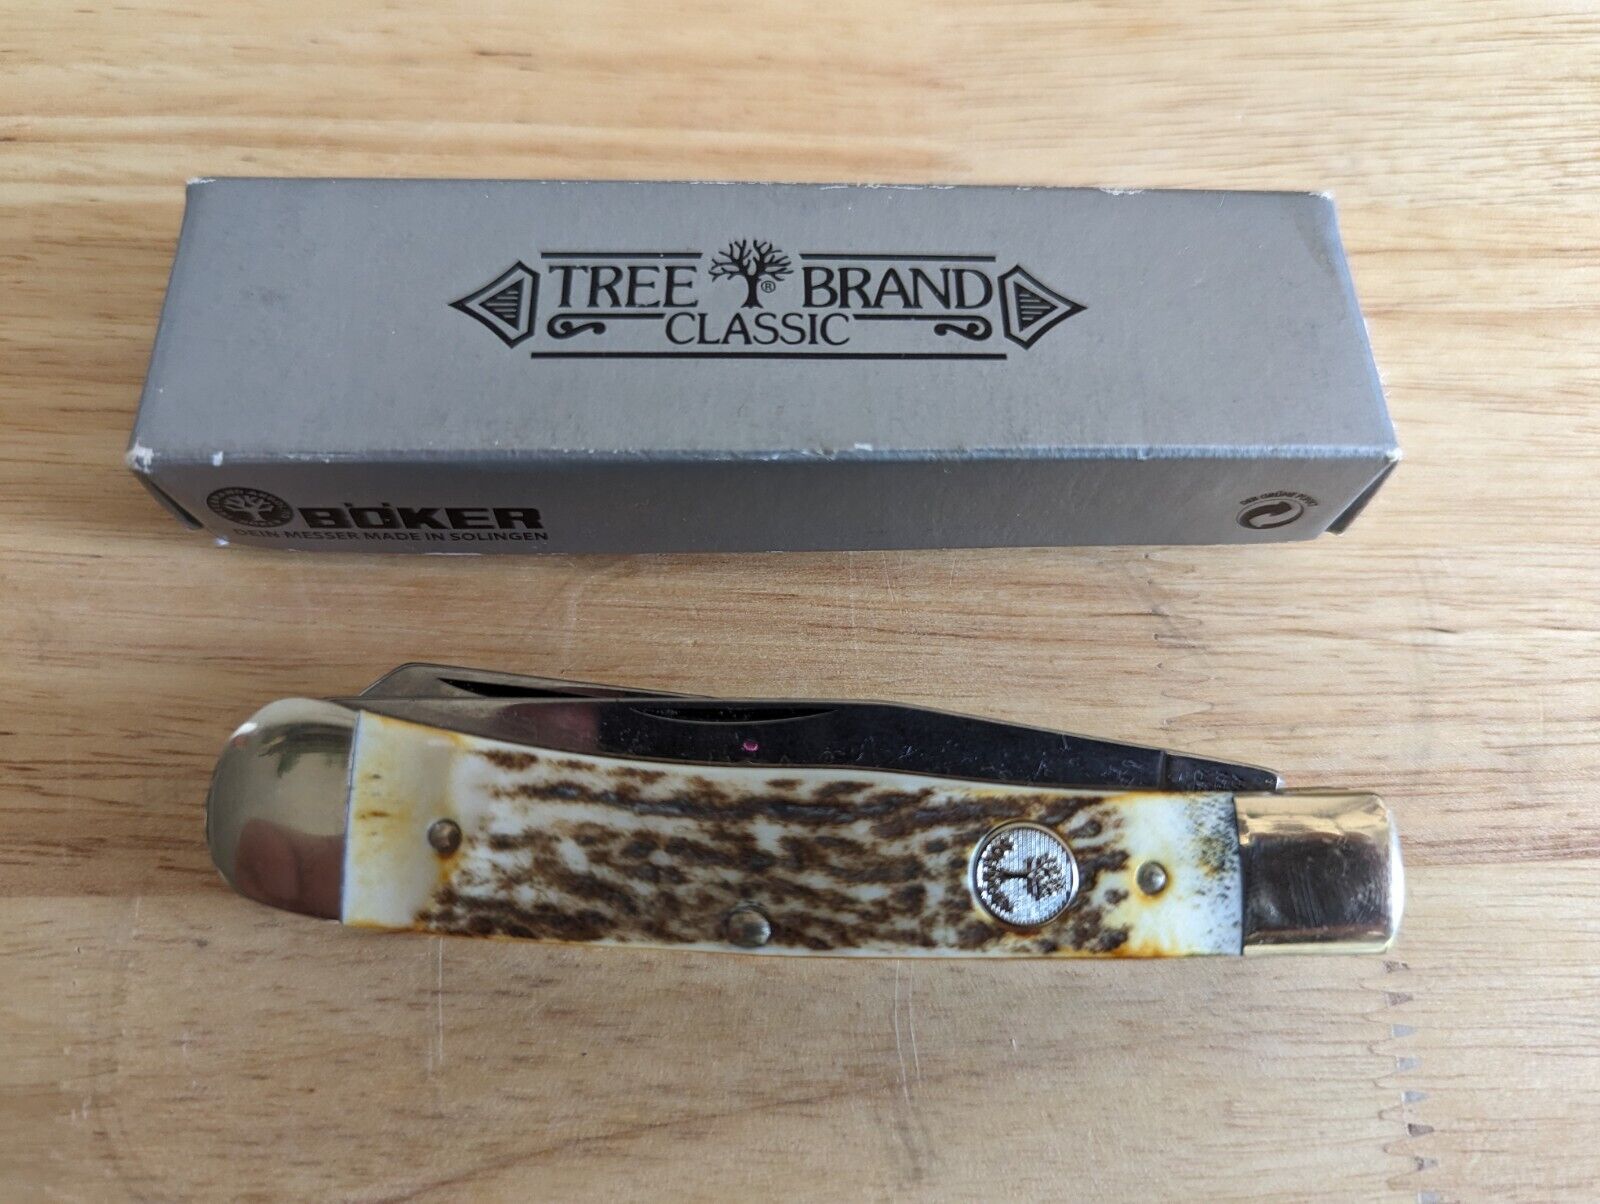 Boker Tree Brand Classic Trapper Knife with Stag Handles Made in Germany